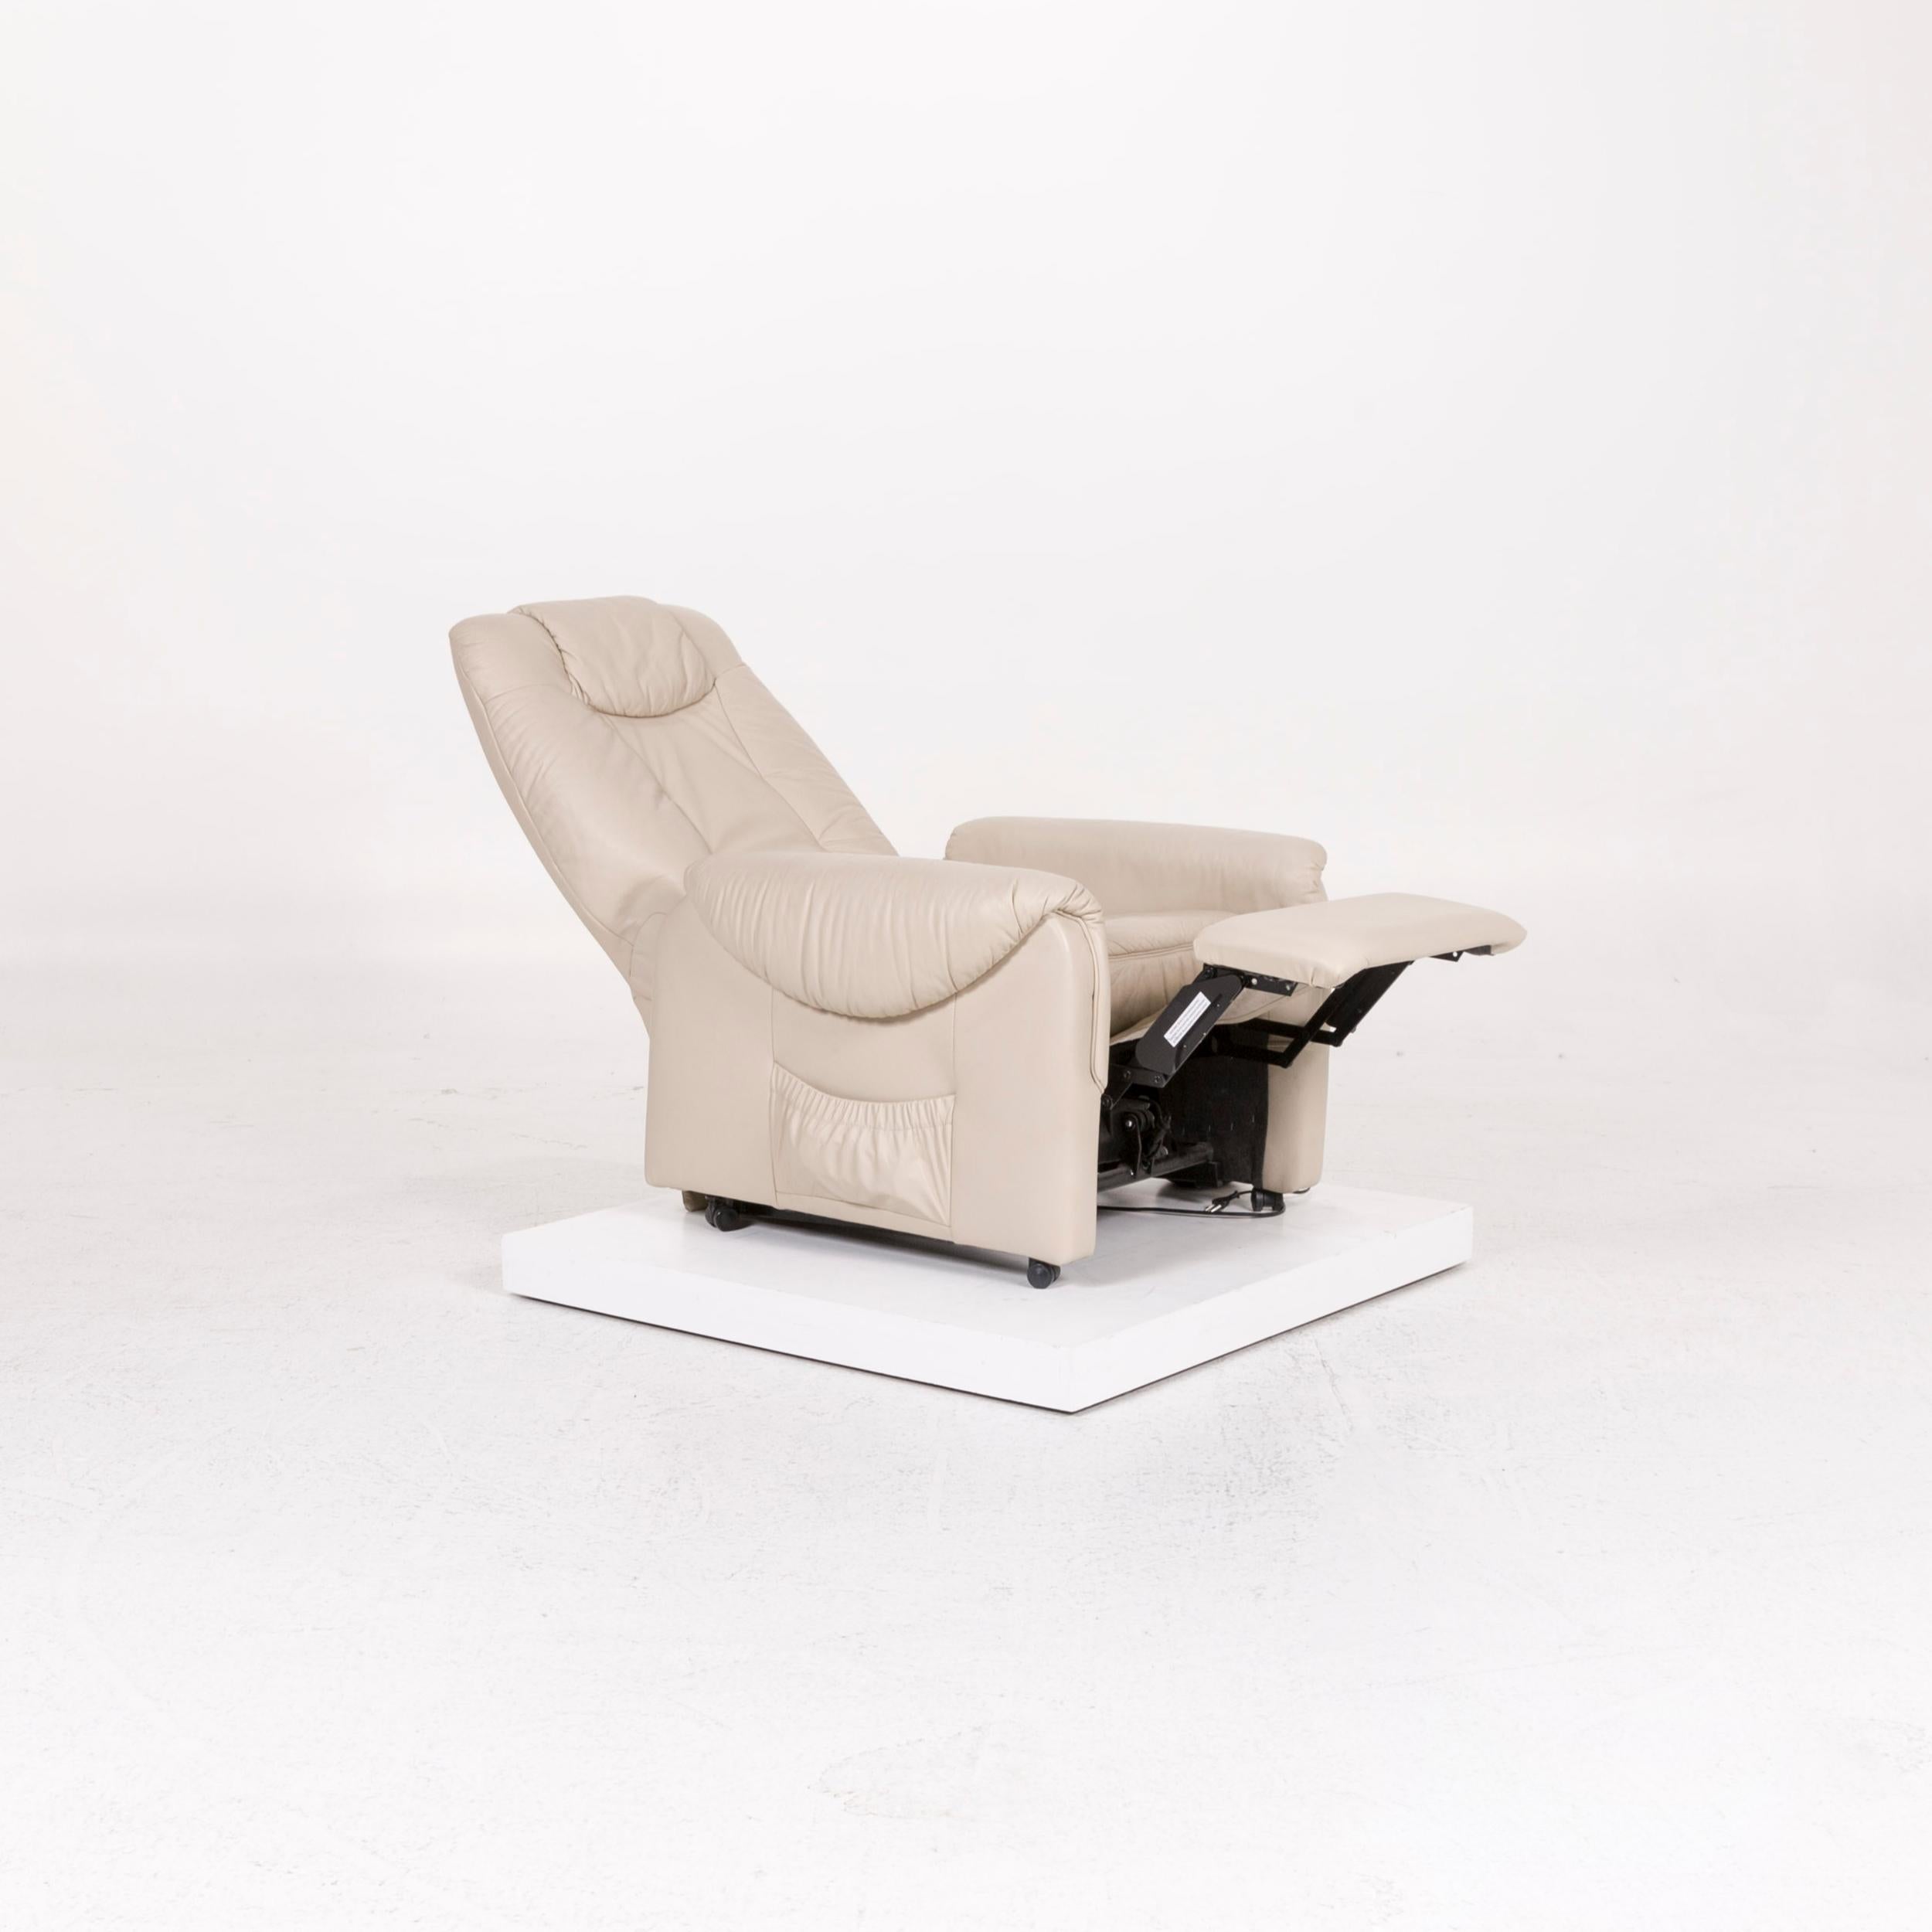 We bring to you a Himolla leather armchair cream electric relax function function stand-up aid.
    
 

 Product measurements in centimeters:
 

Depth 88
Width 76
Height 88
Seat-height 44
Rest-height 58
Seat-depth 55
Seat-width